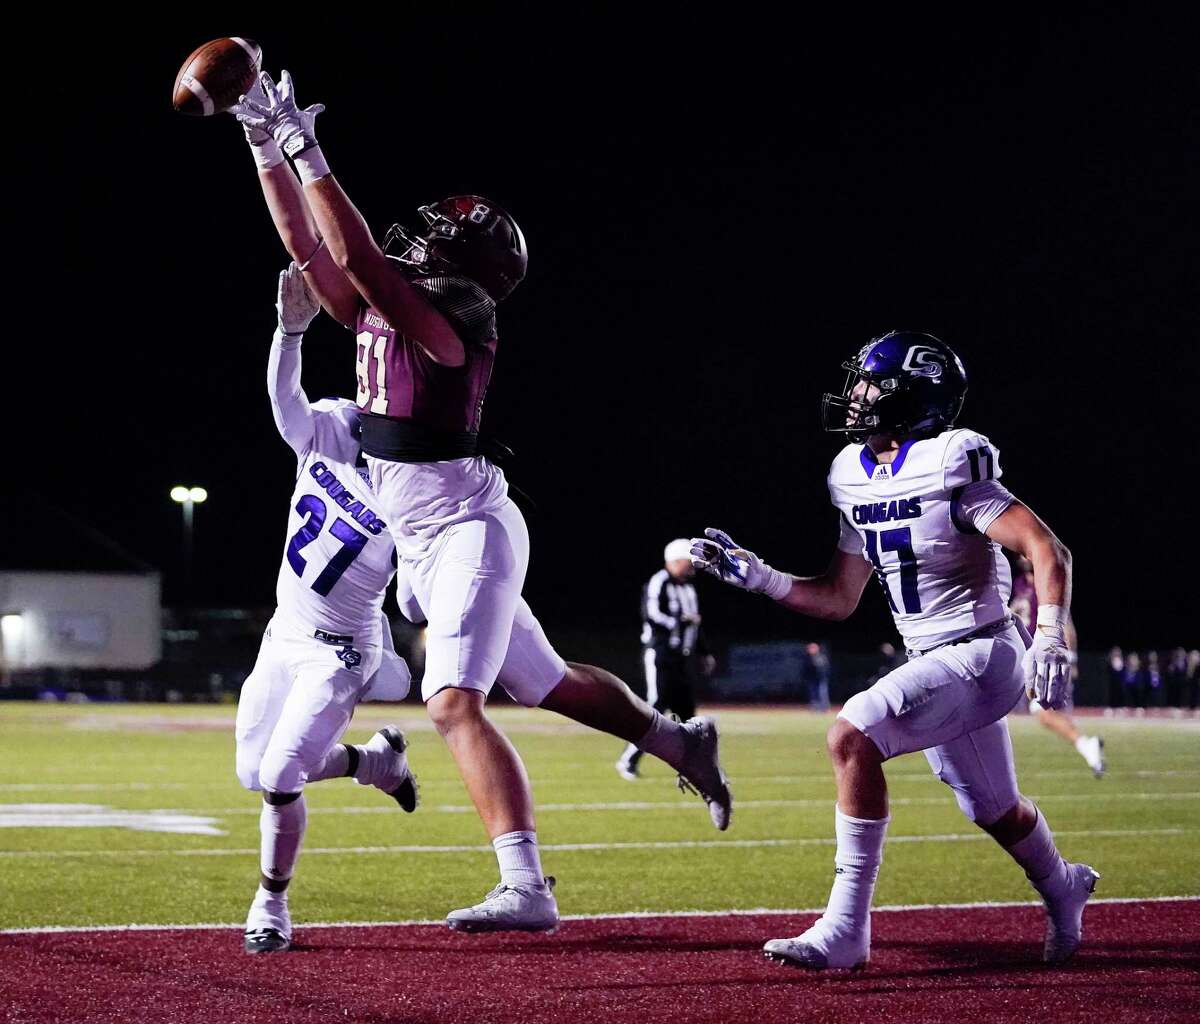 Magnolia West tight end Wade Nobles (81) misses a catch for a 2-point conversion as College Station linebacker Kolton Griswold (27) and defensive back Kyle Walsh defend during the first half of a high school football game, Friday, Nov. 5, 2021, in Magnolia.